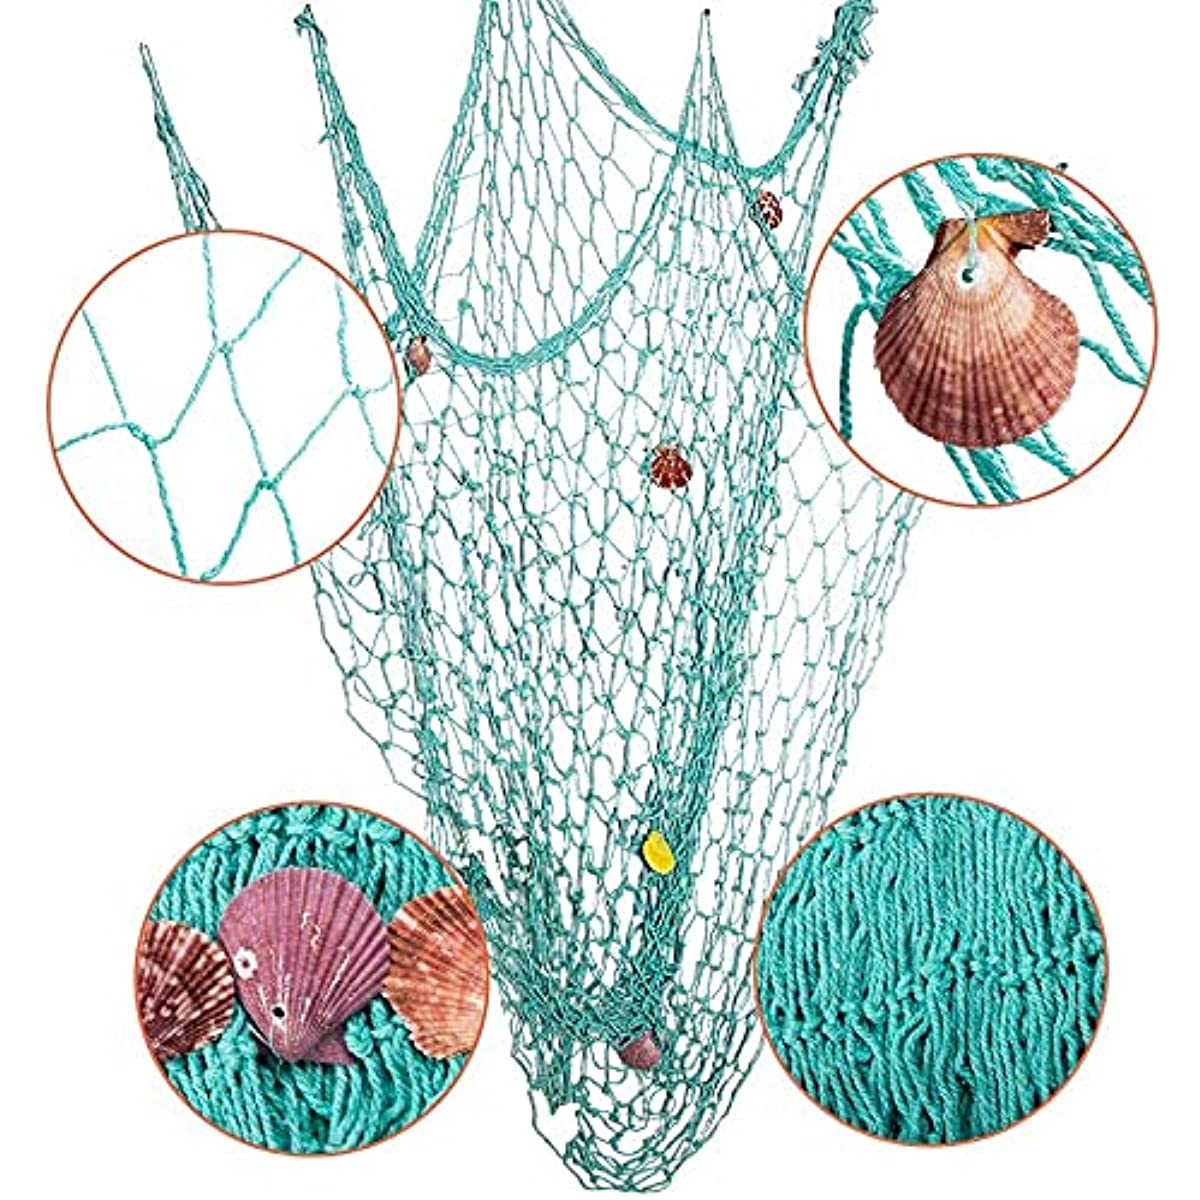  Decorative Fish Net, CHICIEVE White Ocean Fish Net Decor for  Home Kid's Room Party Wall Ornaments : Home & Kitchen